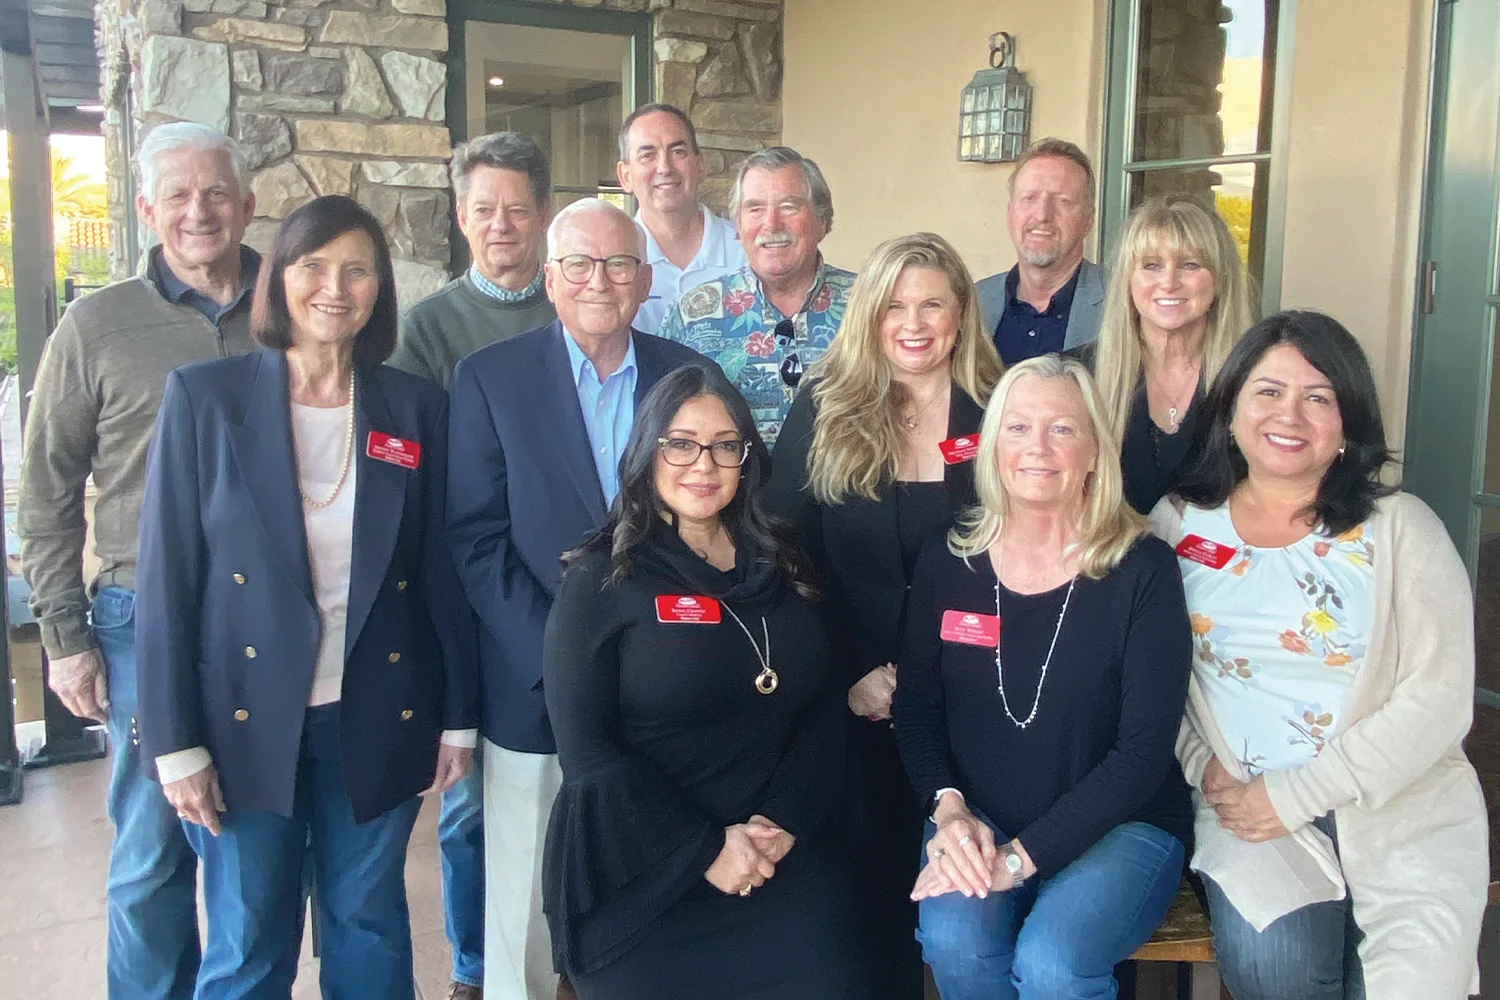 Aliso Viejo Chamber of Commerce - Aliso Viejo Country Club